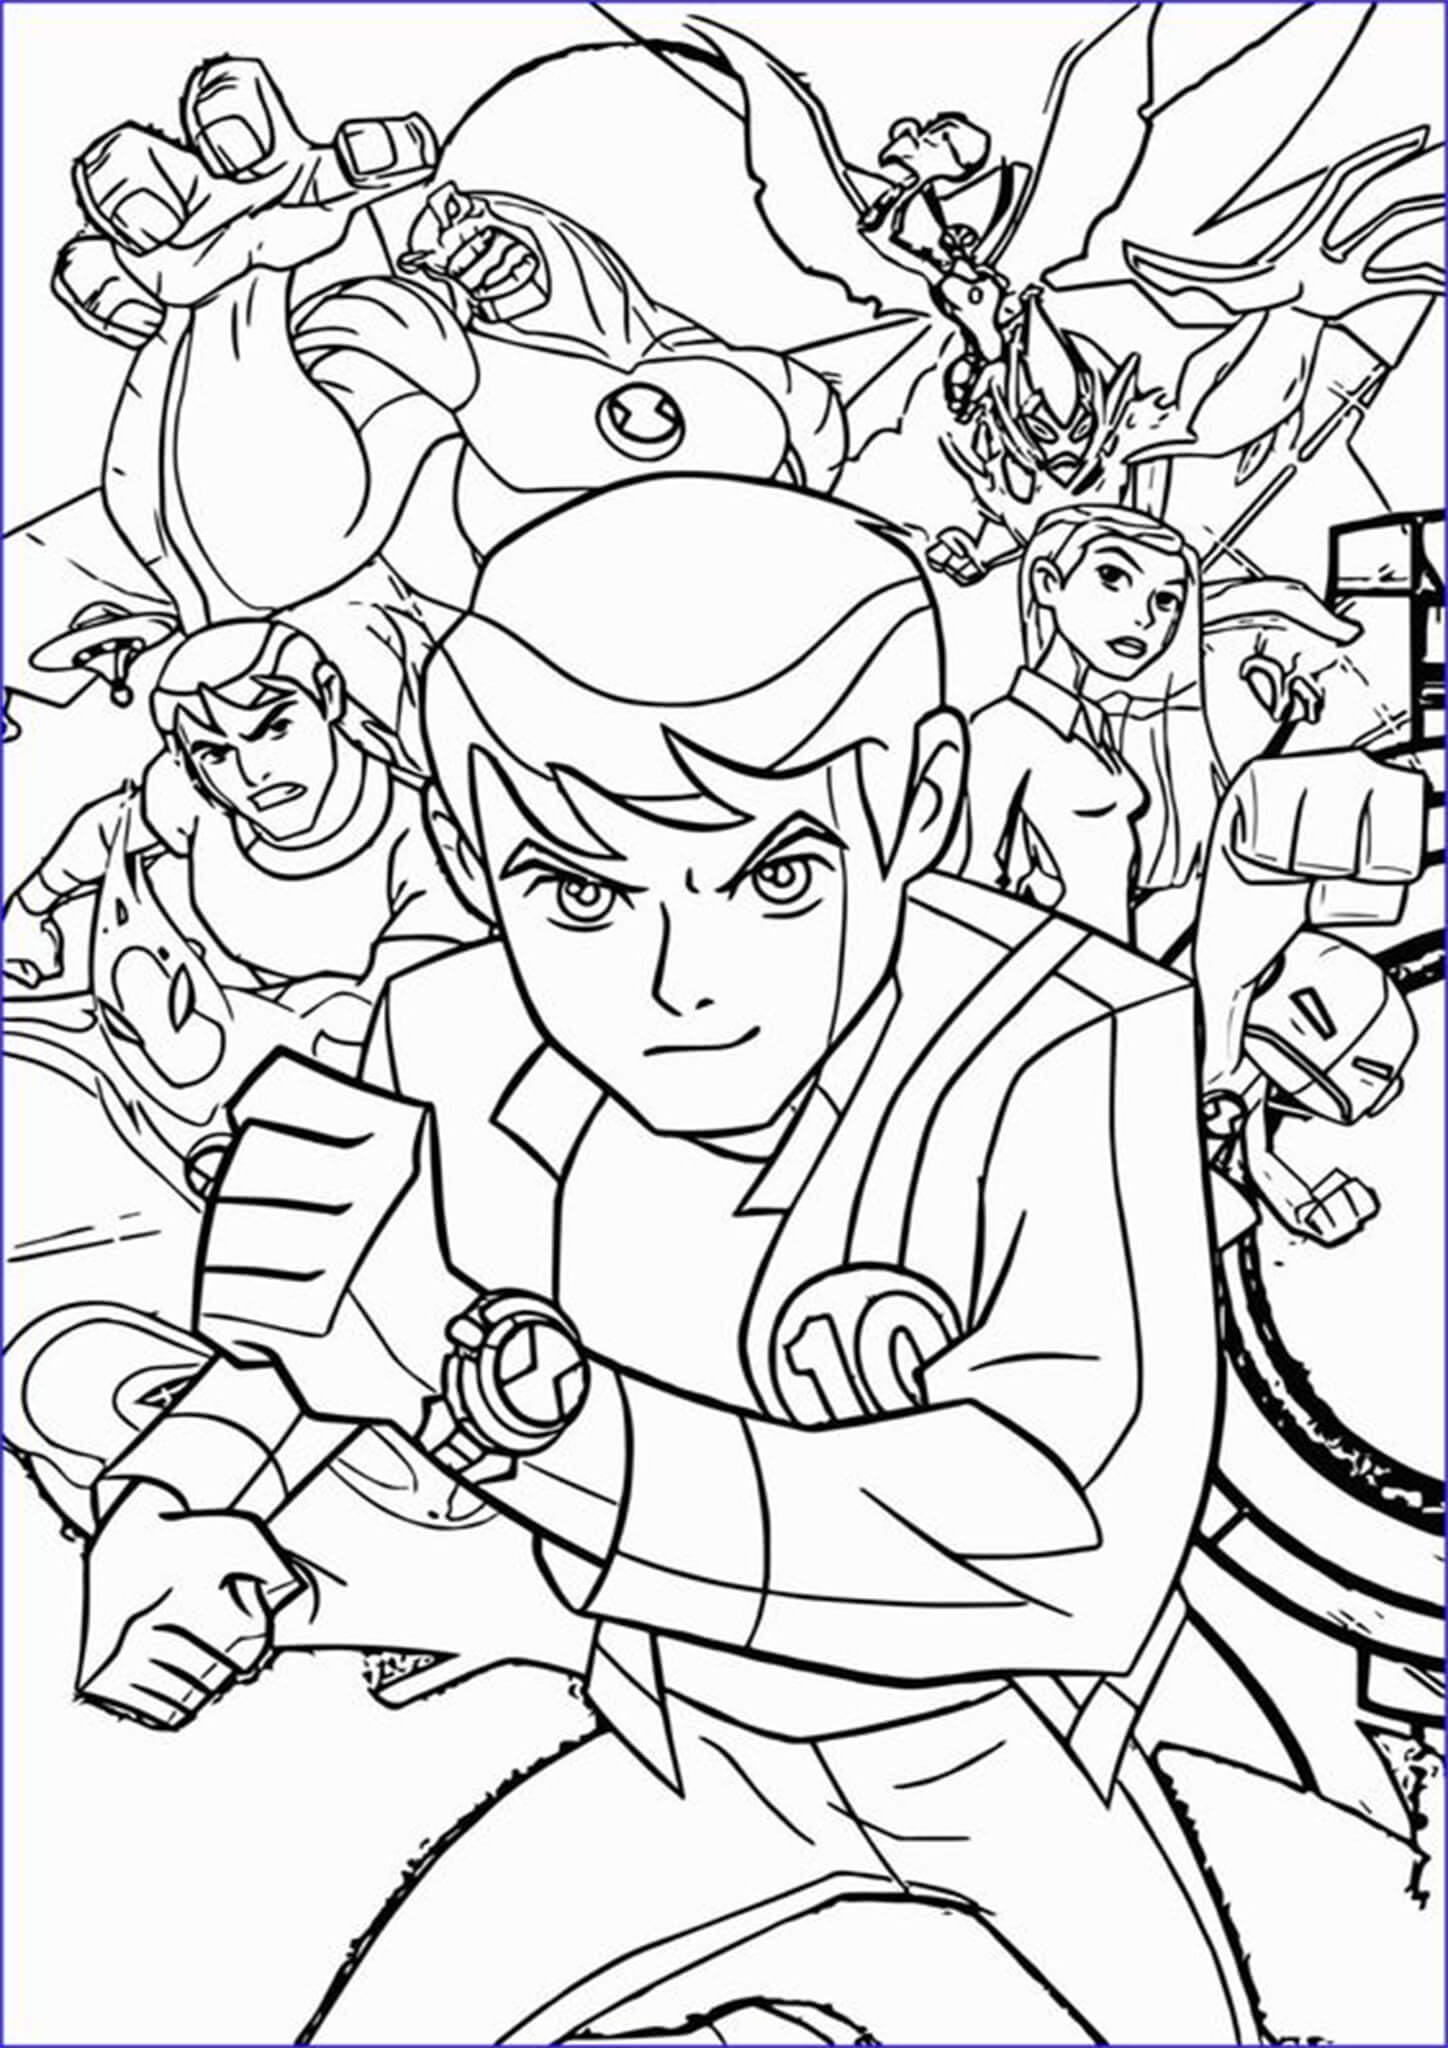 coloring-pages-ben-10